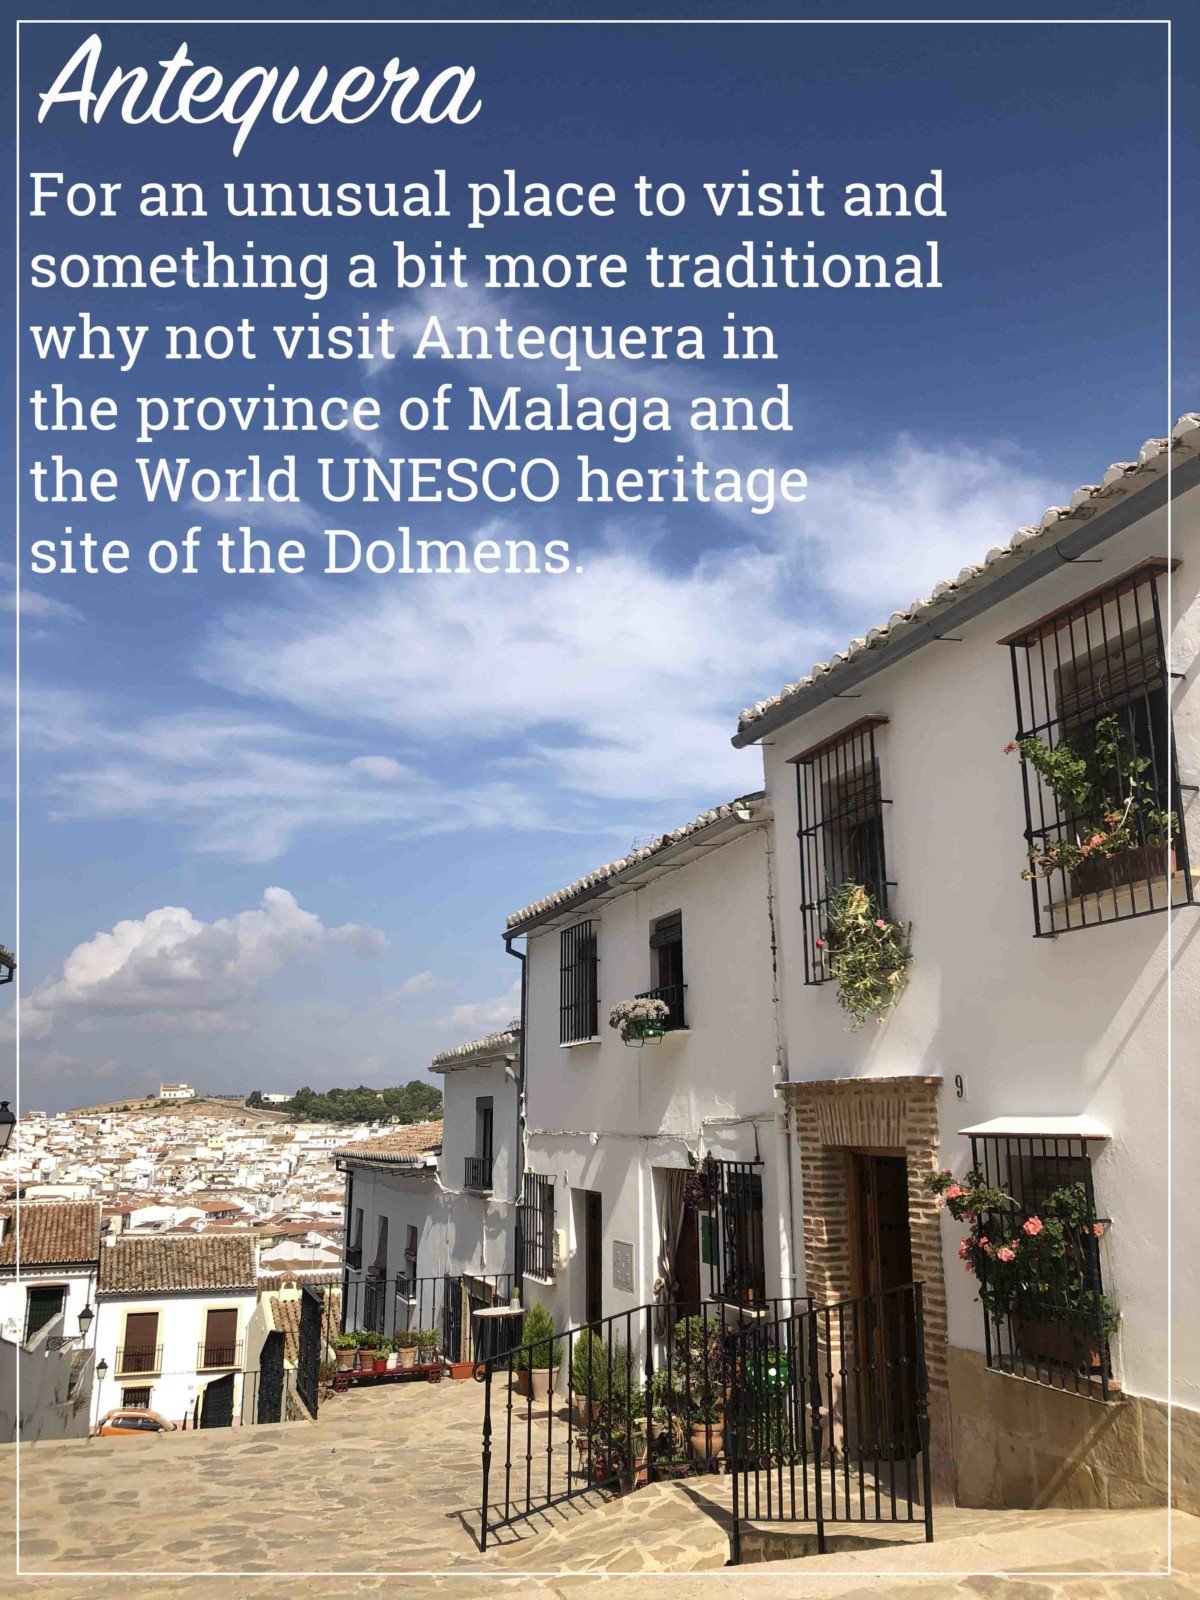 For an unusual place to visit and something a bit more traditional why not visit Antequera in the province of Malaga and the World UNESCO heritage site of the Dolmens.